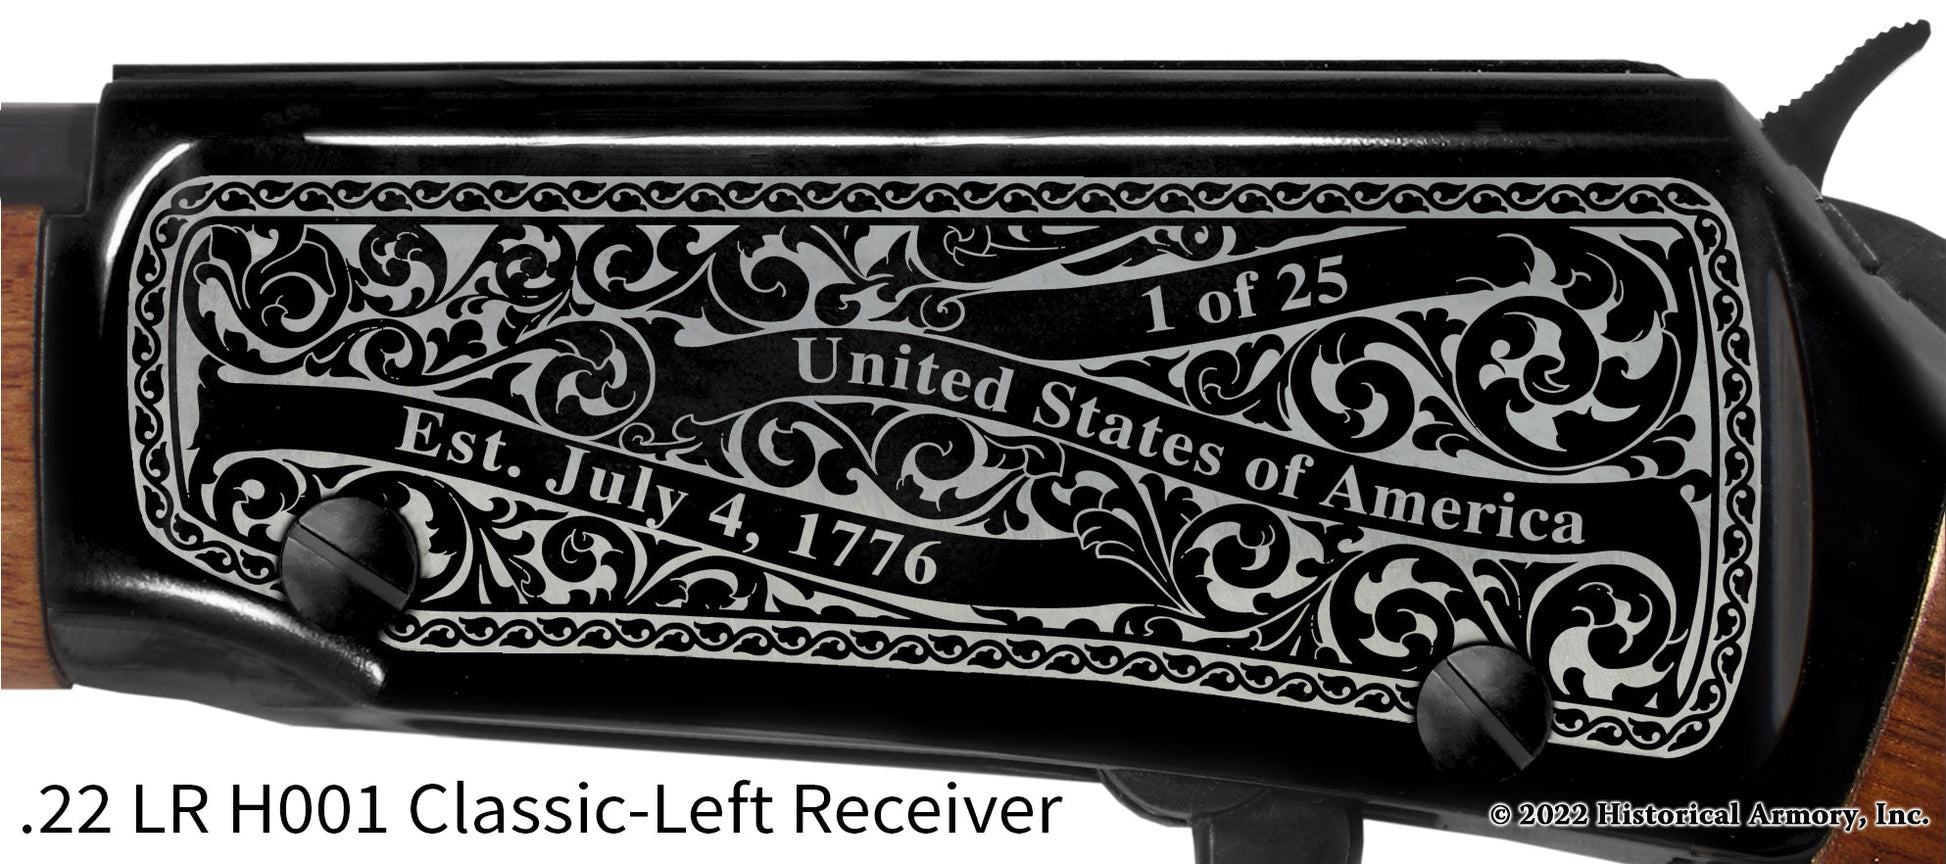 Clark County Kentucky Engraved Henry H001 Rifle